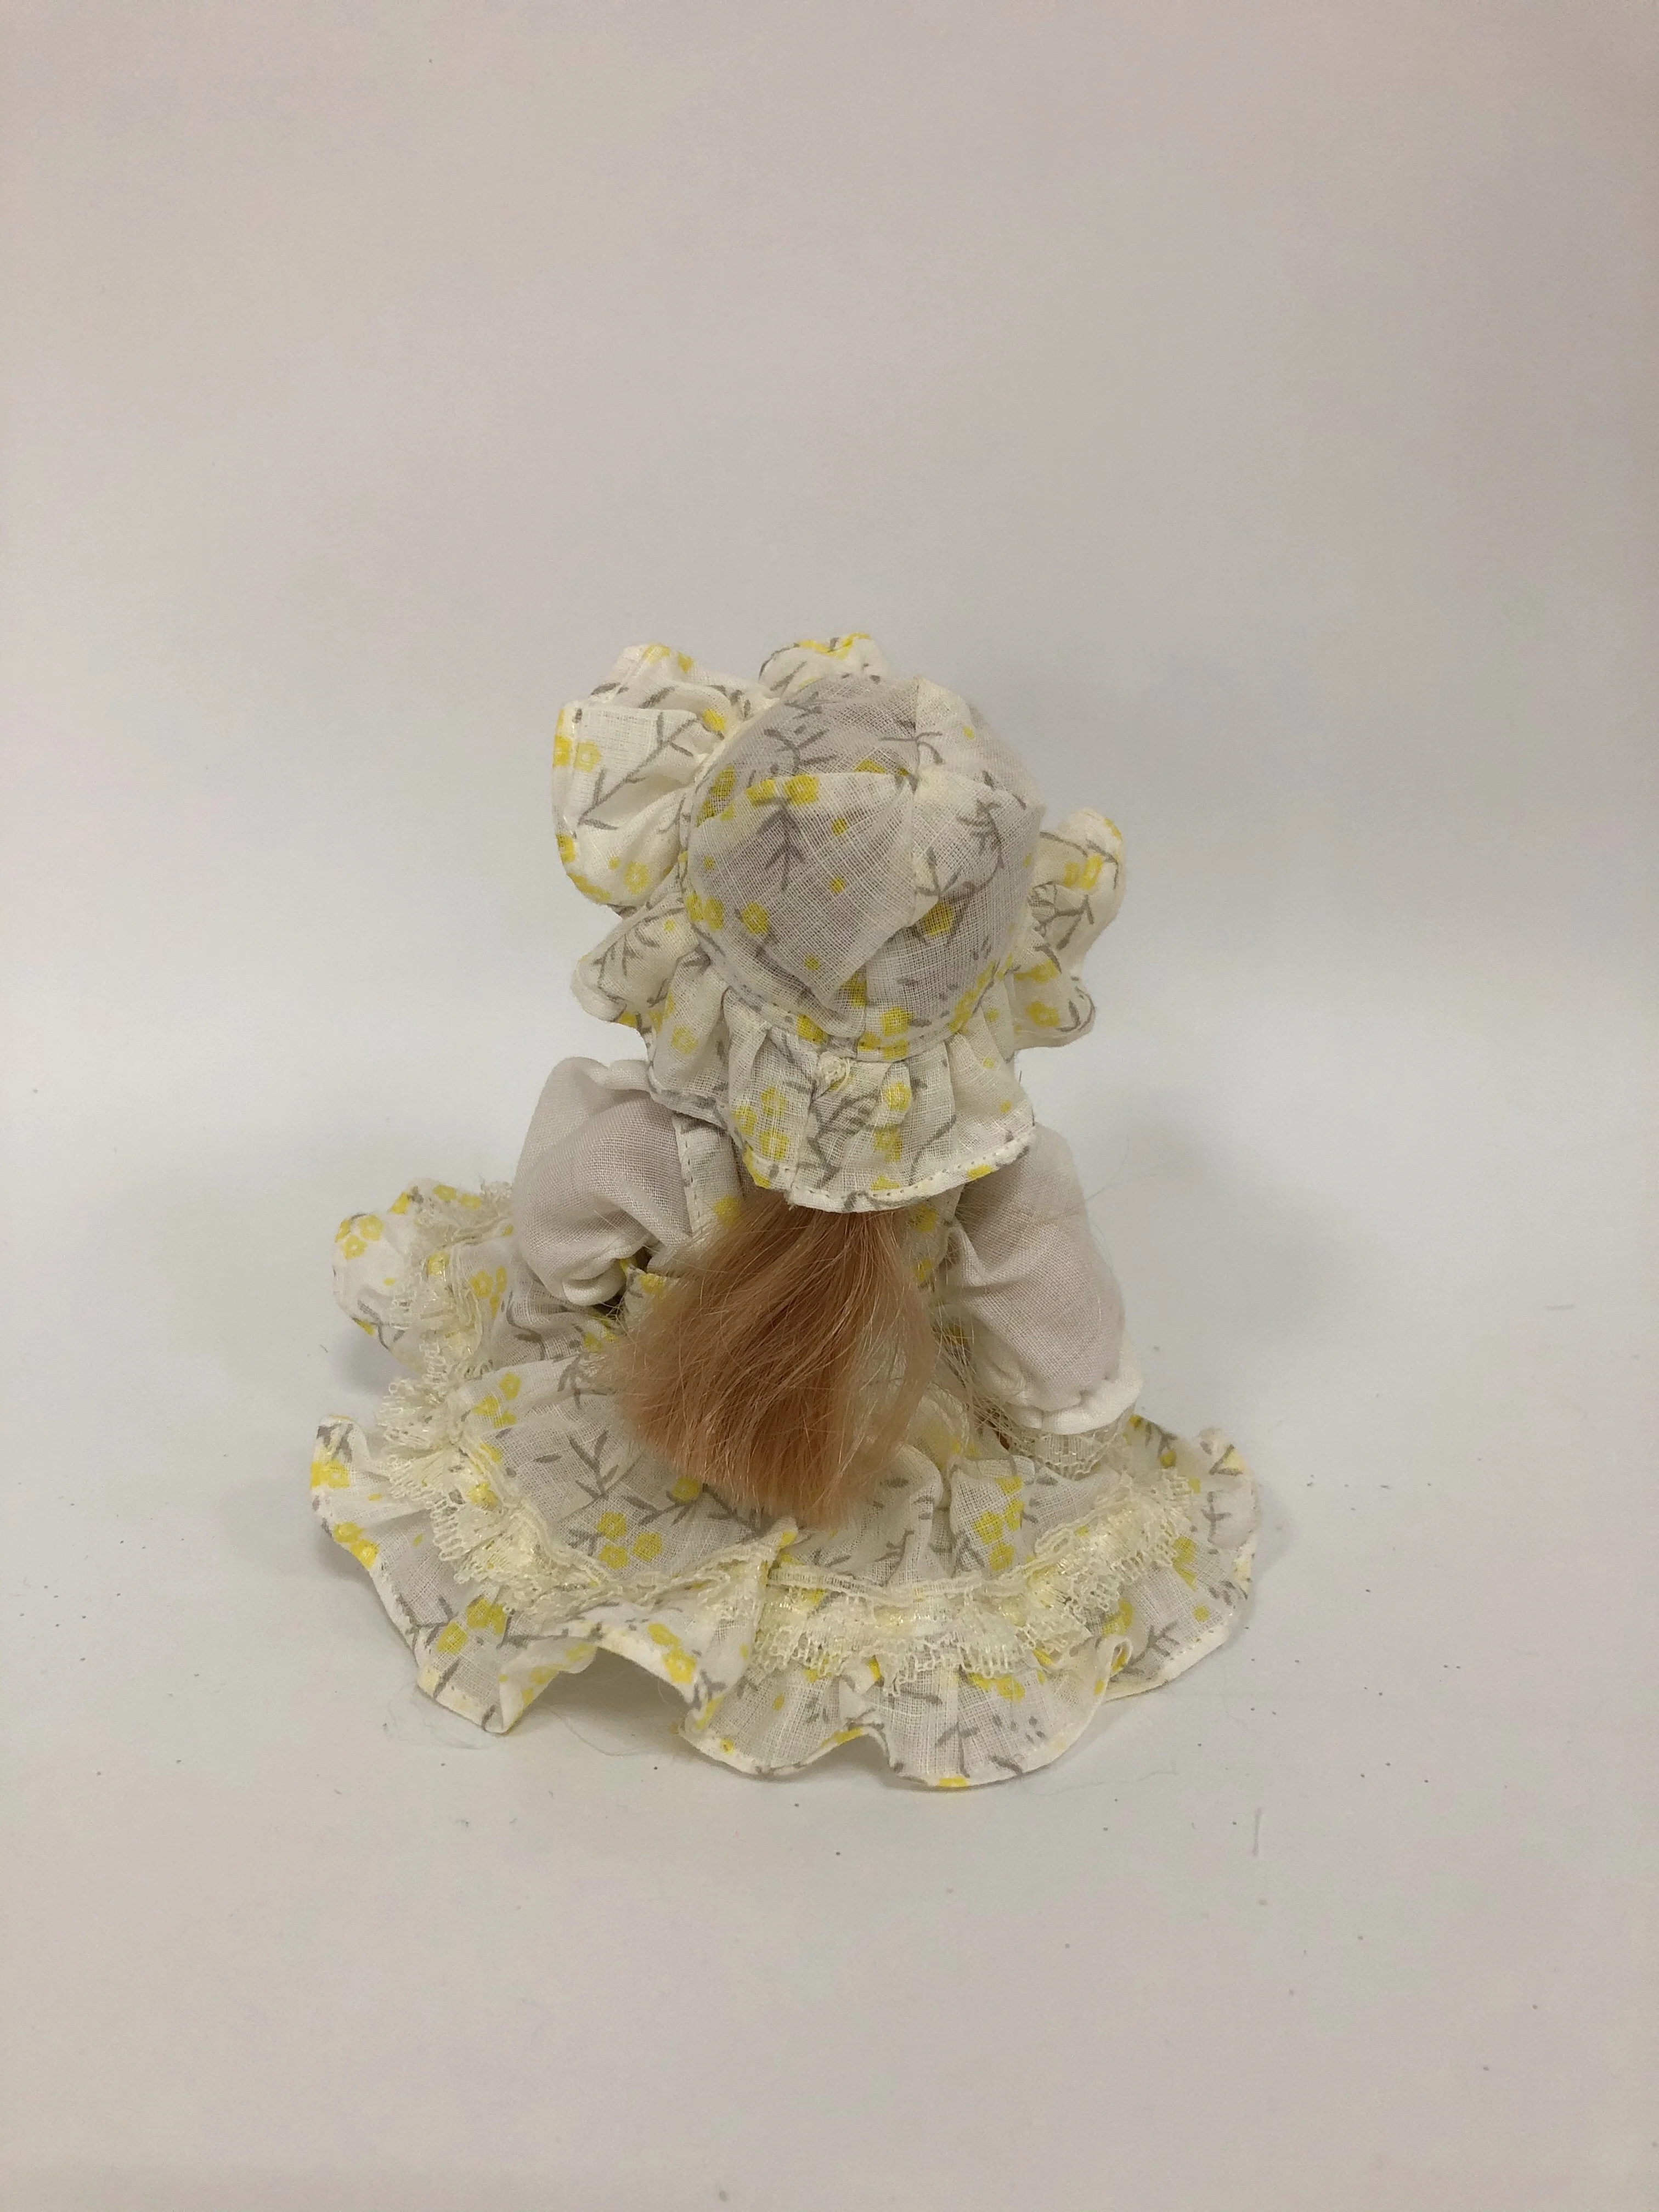 Rural style Porcelain dolls with nice cloth